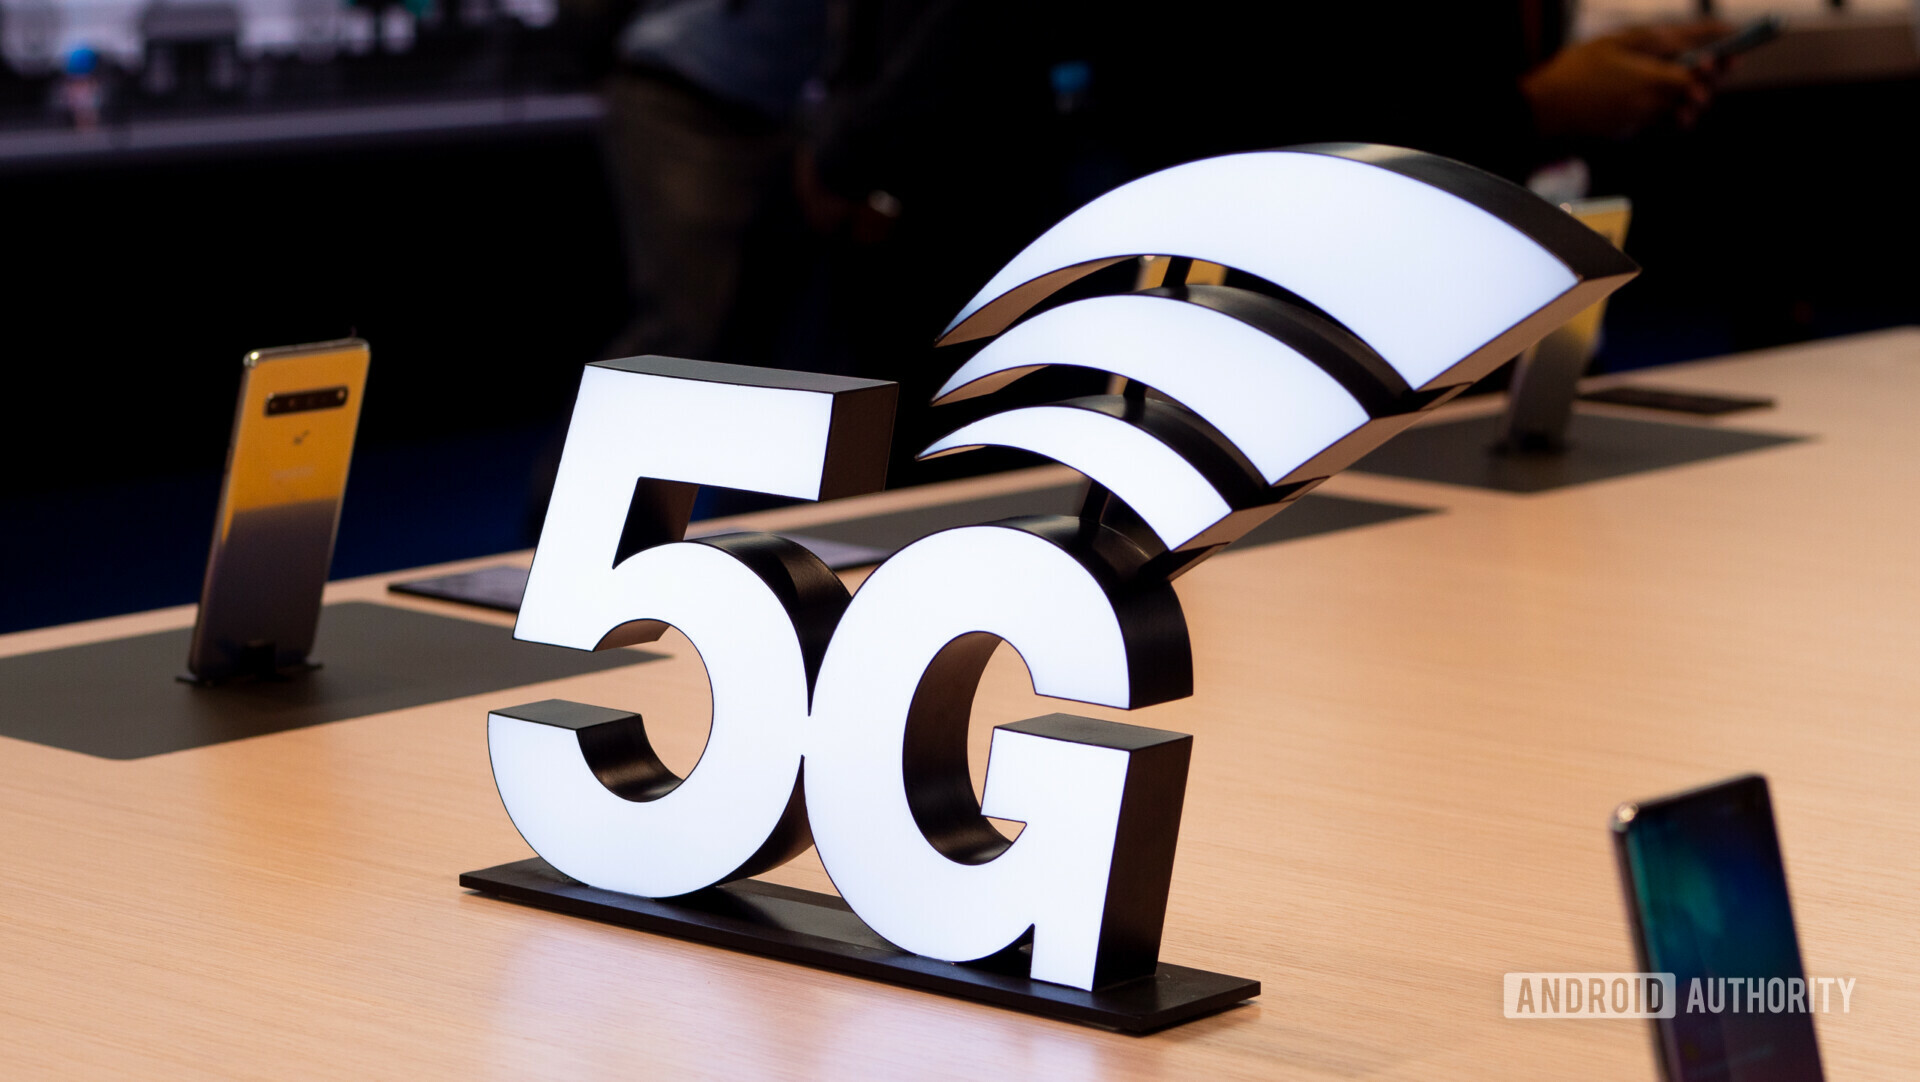 5G phone prices are set to dip in 2020, but how low is anyone's guess.